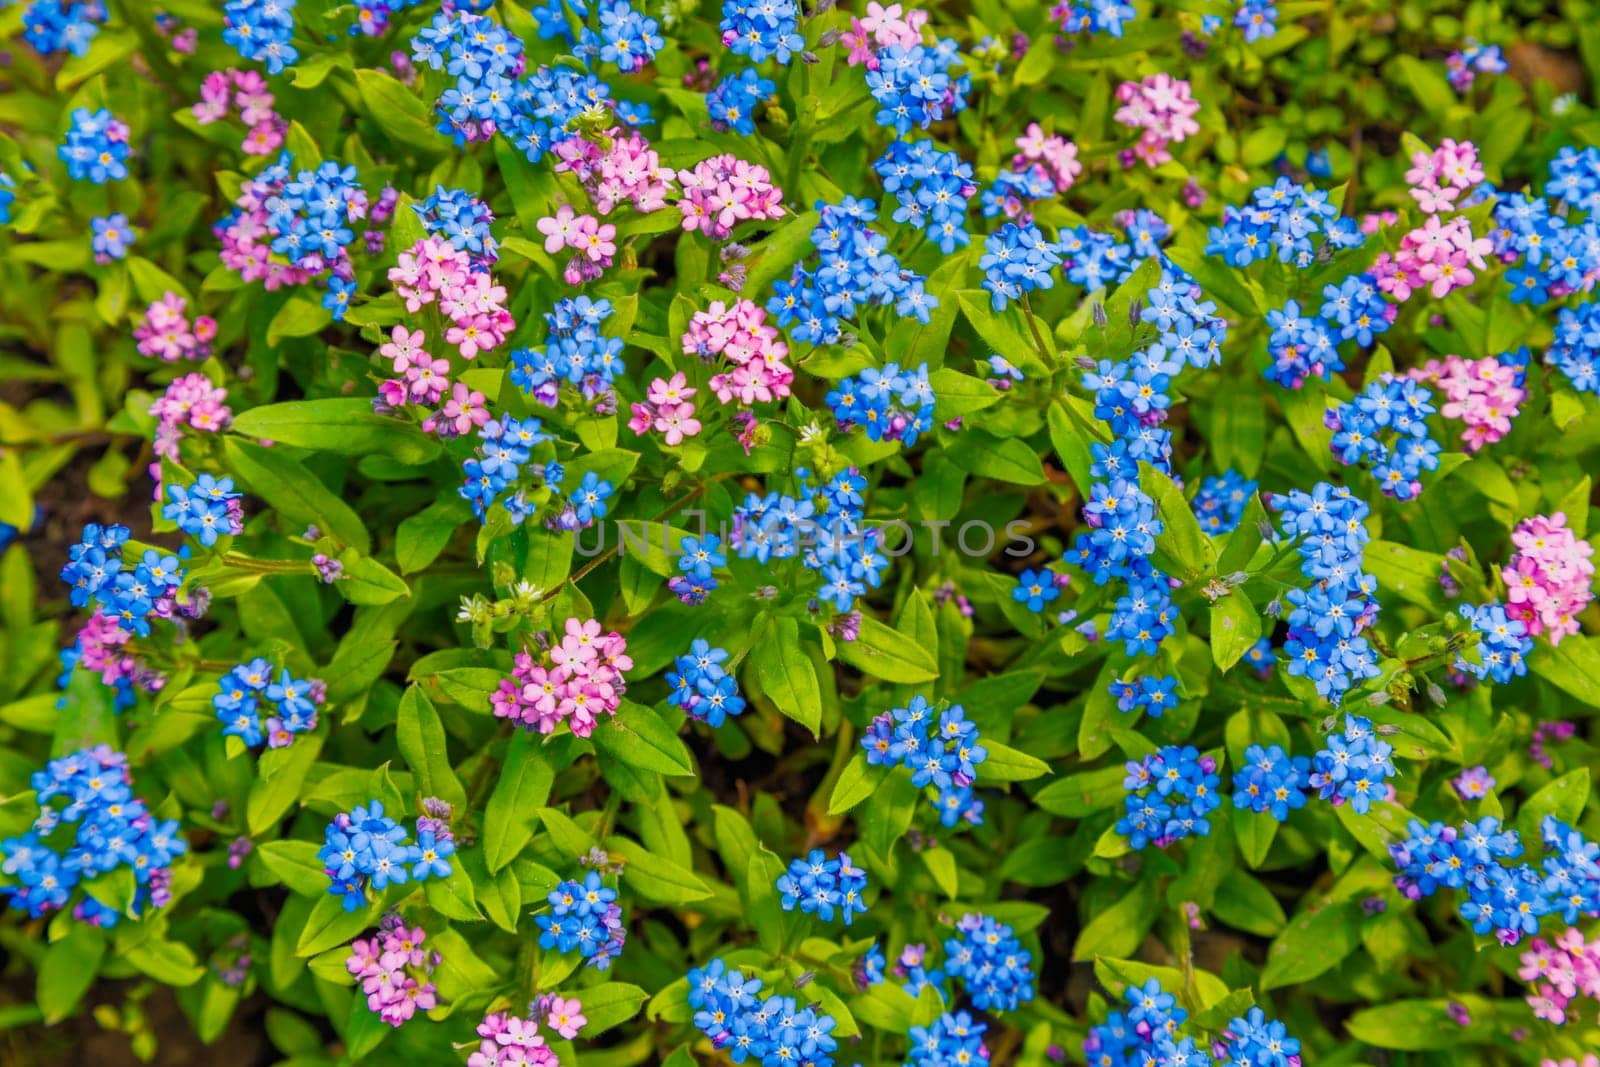 Blue and pink garden forget-me-not Myosotis scorpioides flowers amidst green leaves. An array of flowers creating a full-frame background and texture with high angle view.